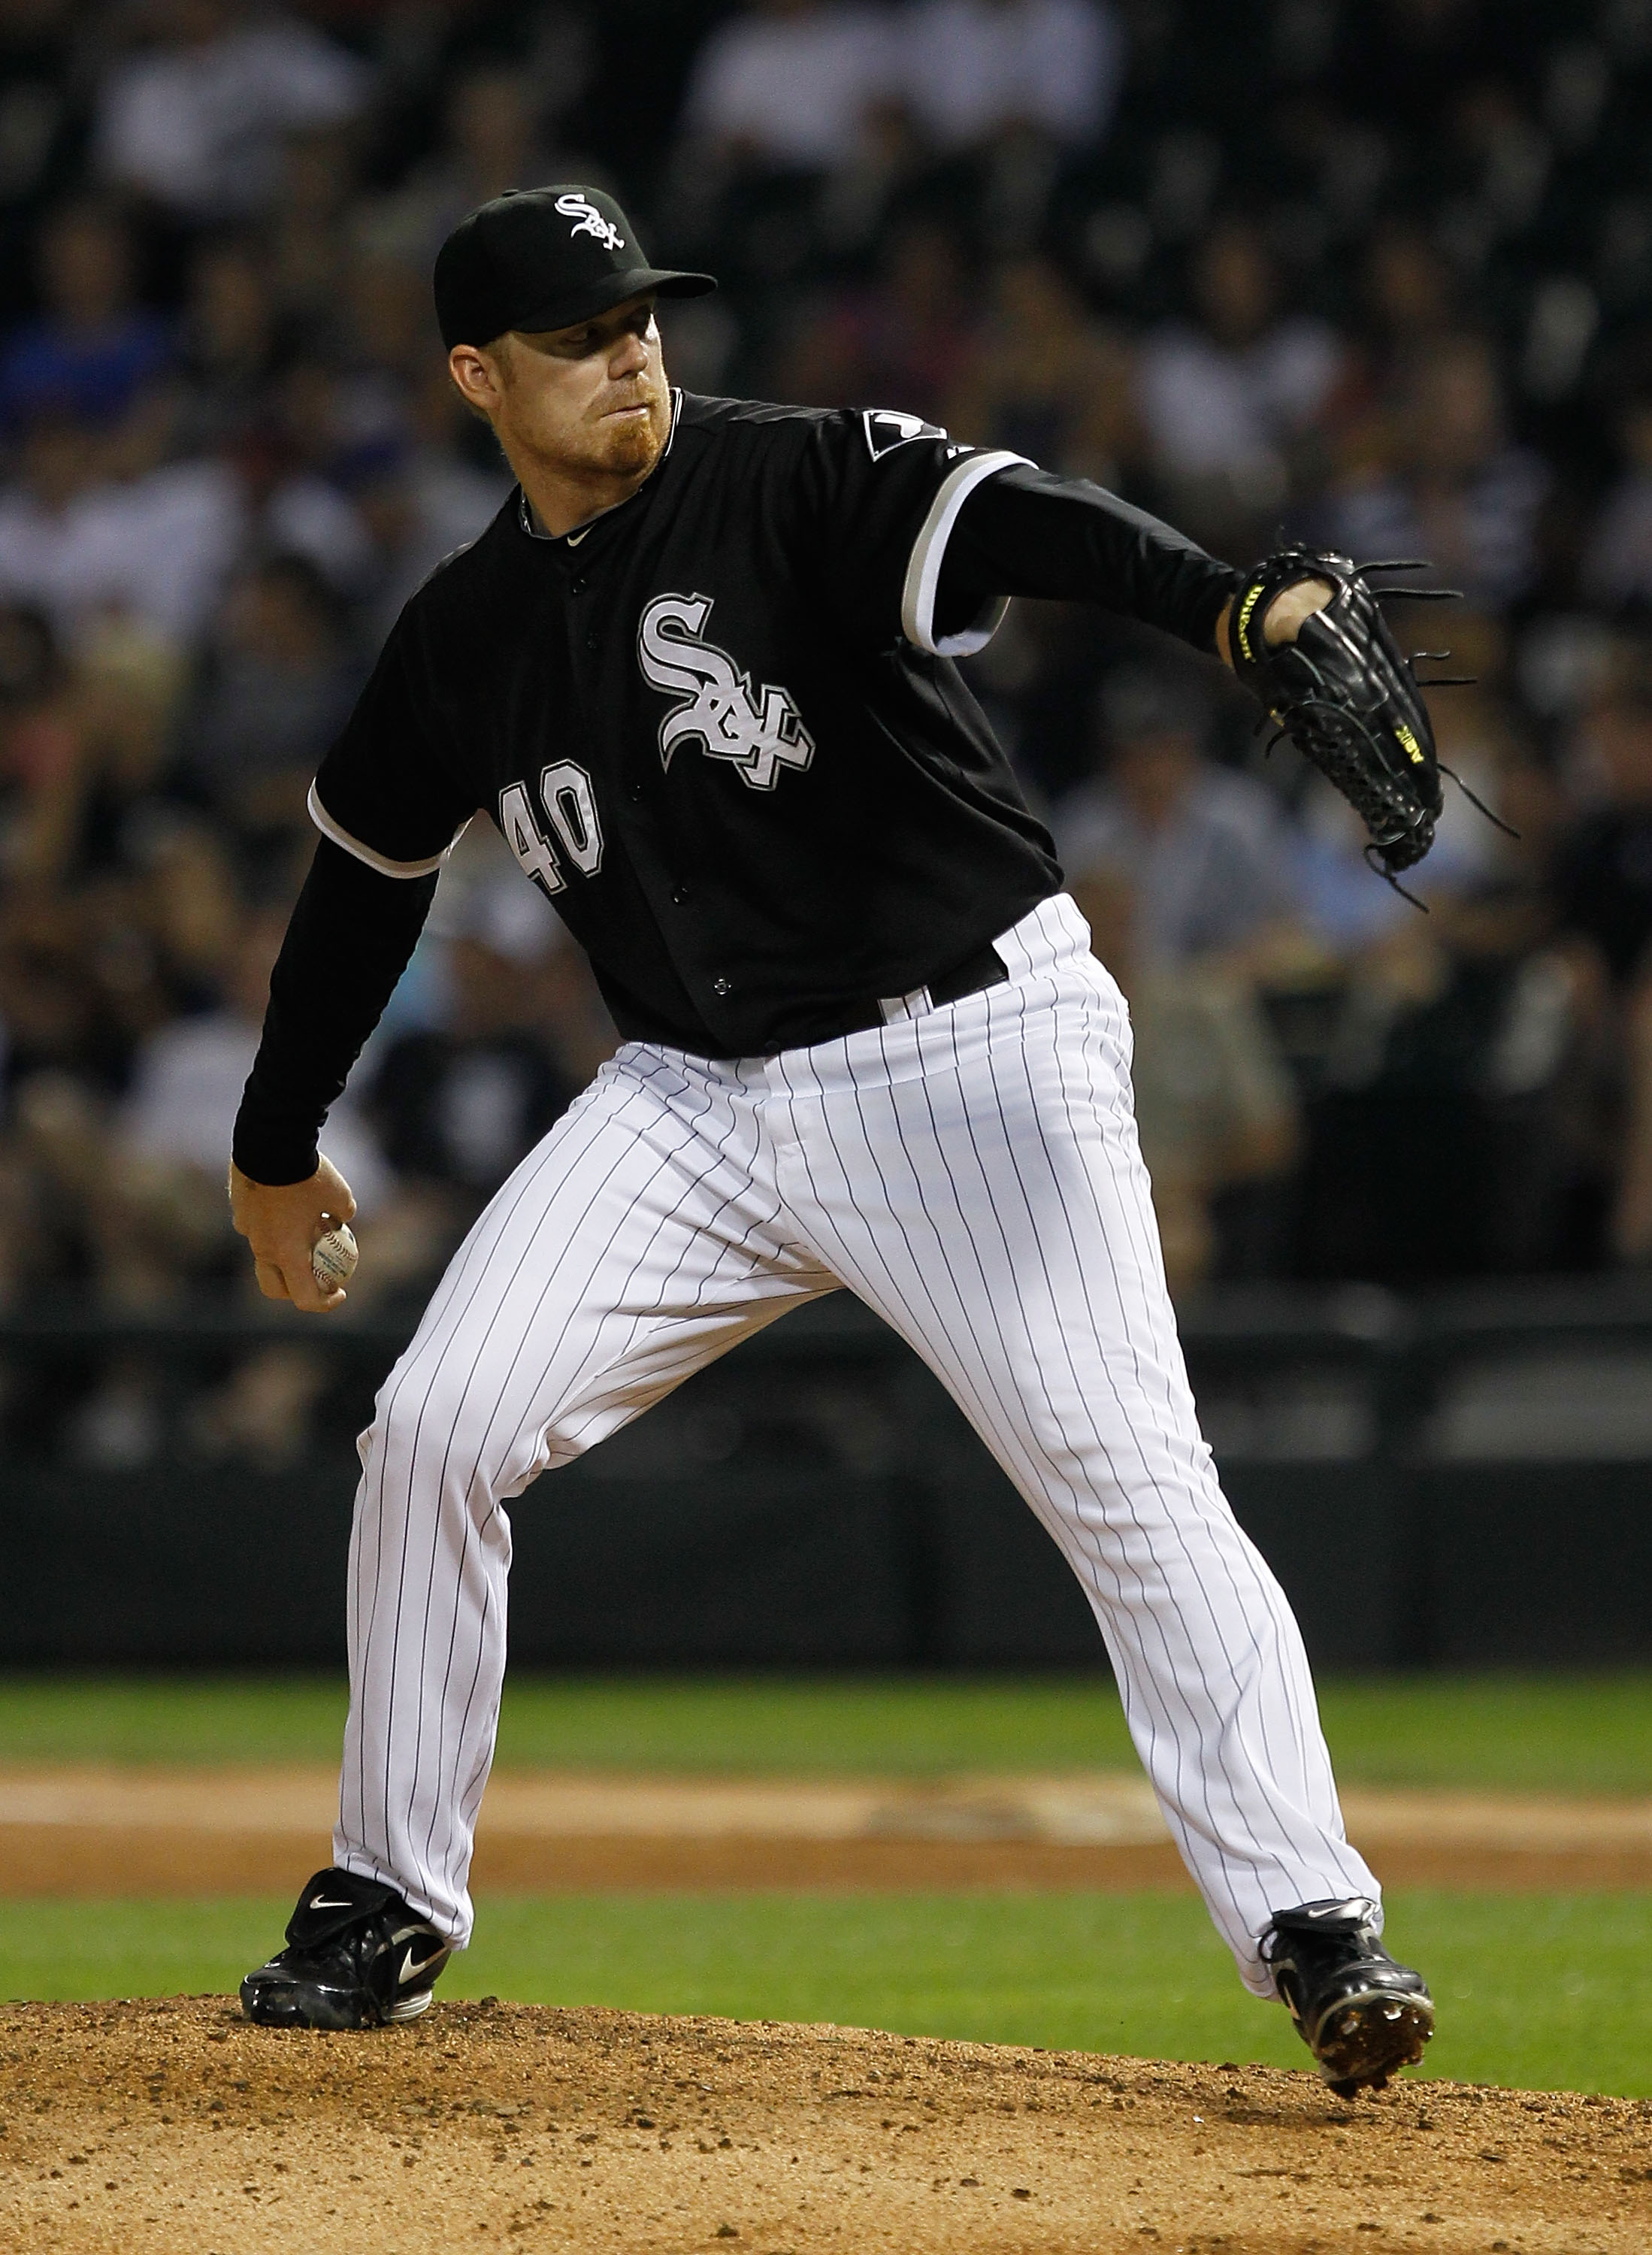 CHICAGO - JULY 07: J.J. Putz #40 of the Chicago White Sox pitches against the Los Angeles Angels of Anaheim at U.S. Cellular Field on July 7, 2010 in Chicago, Illinois. The White Sox defeated the Angels 5-2. (Photo by Jonathan Daniel/Getty Images)